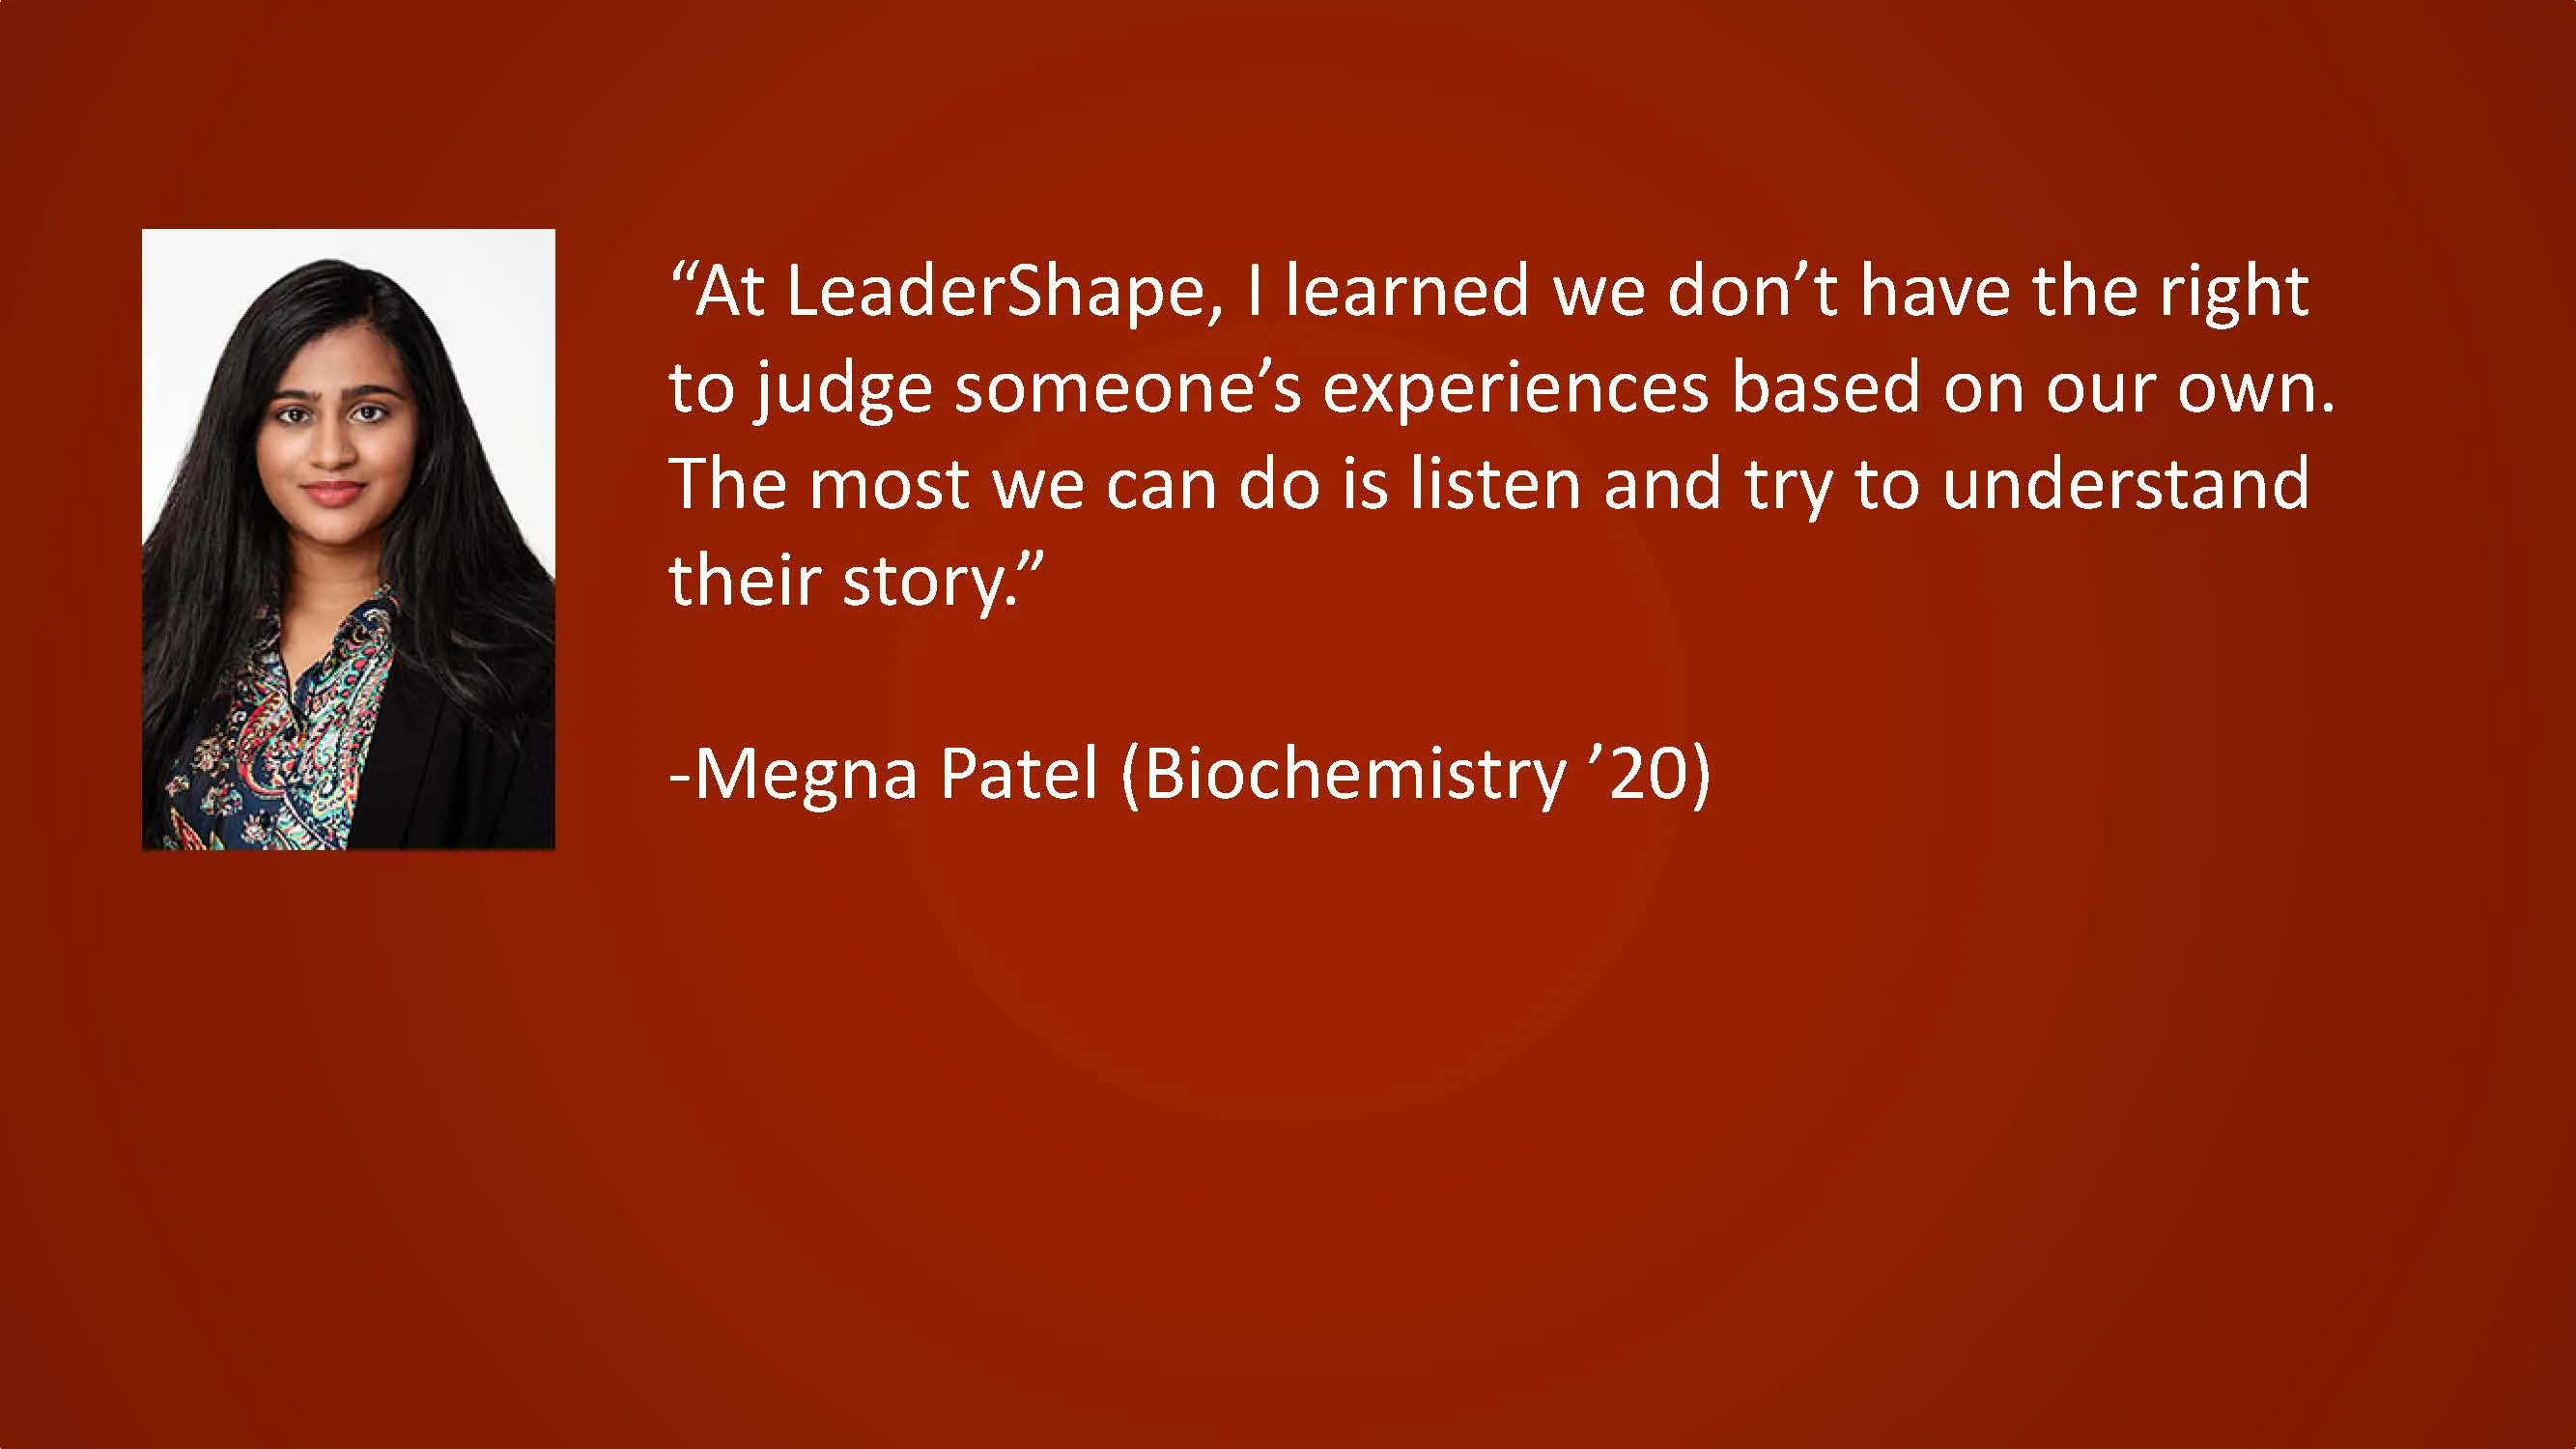 At LeaderShape, I learned we don't have the right to judge someone's experiences based on our own. The most we can do is listen and try to understand their story. — Megna Patel (Biochemistry '20)